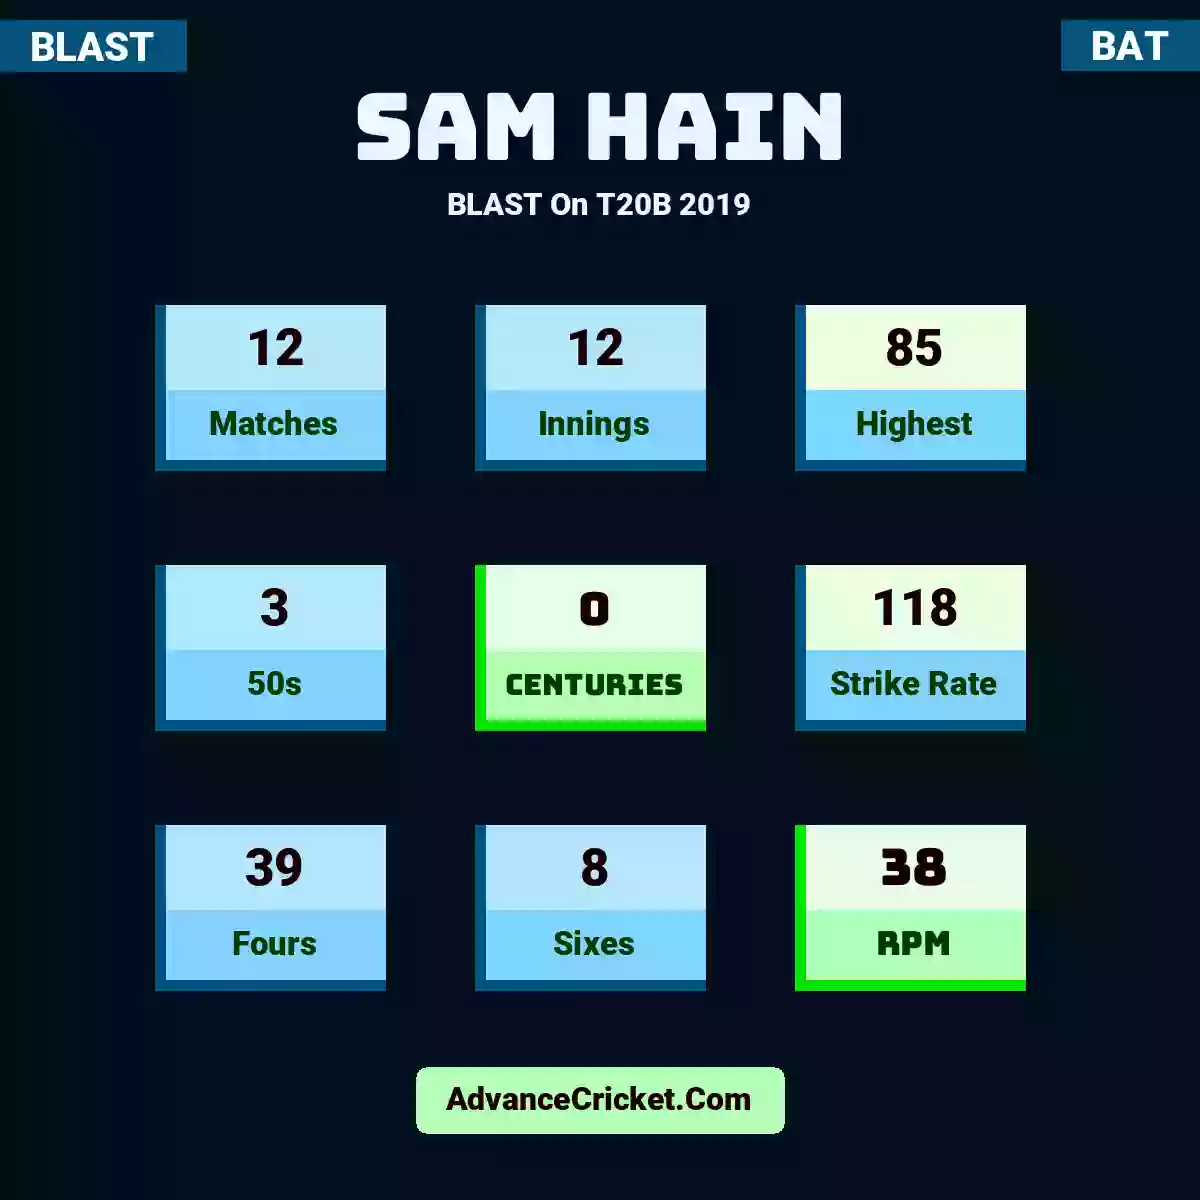 Sam Hain BLAST  On T20B 2019, Sam Hain played 12 matches, scored 85 runs as highest, 3 half-centuries, and 0 centuries, with a strike rate of 118. S.Hain hit 39 fours and 8 sixes, with an RPM of 38.